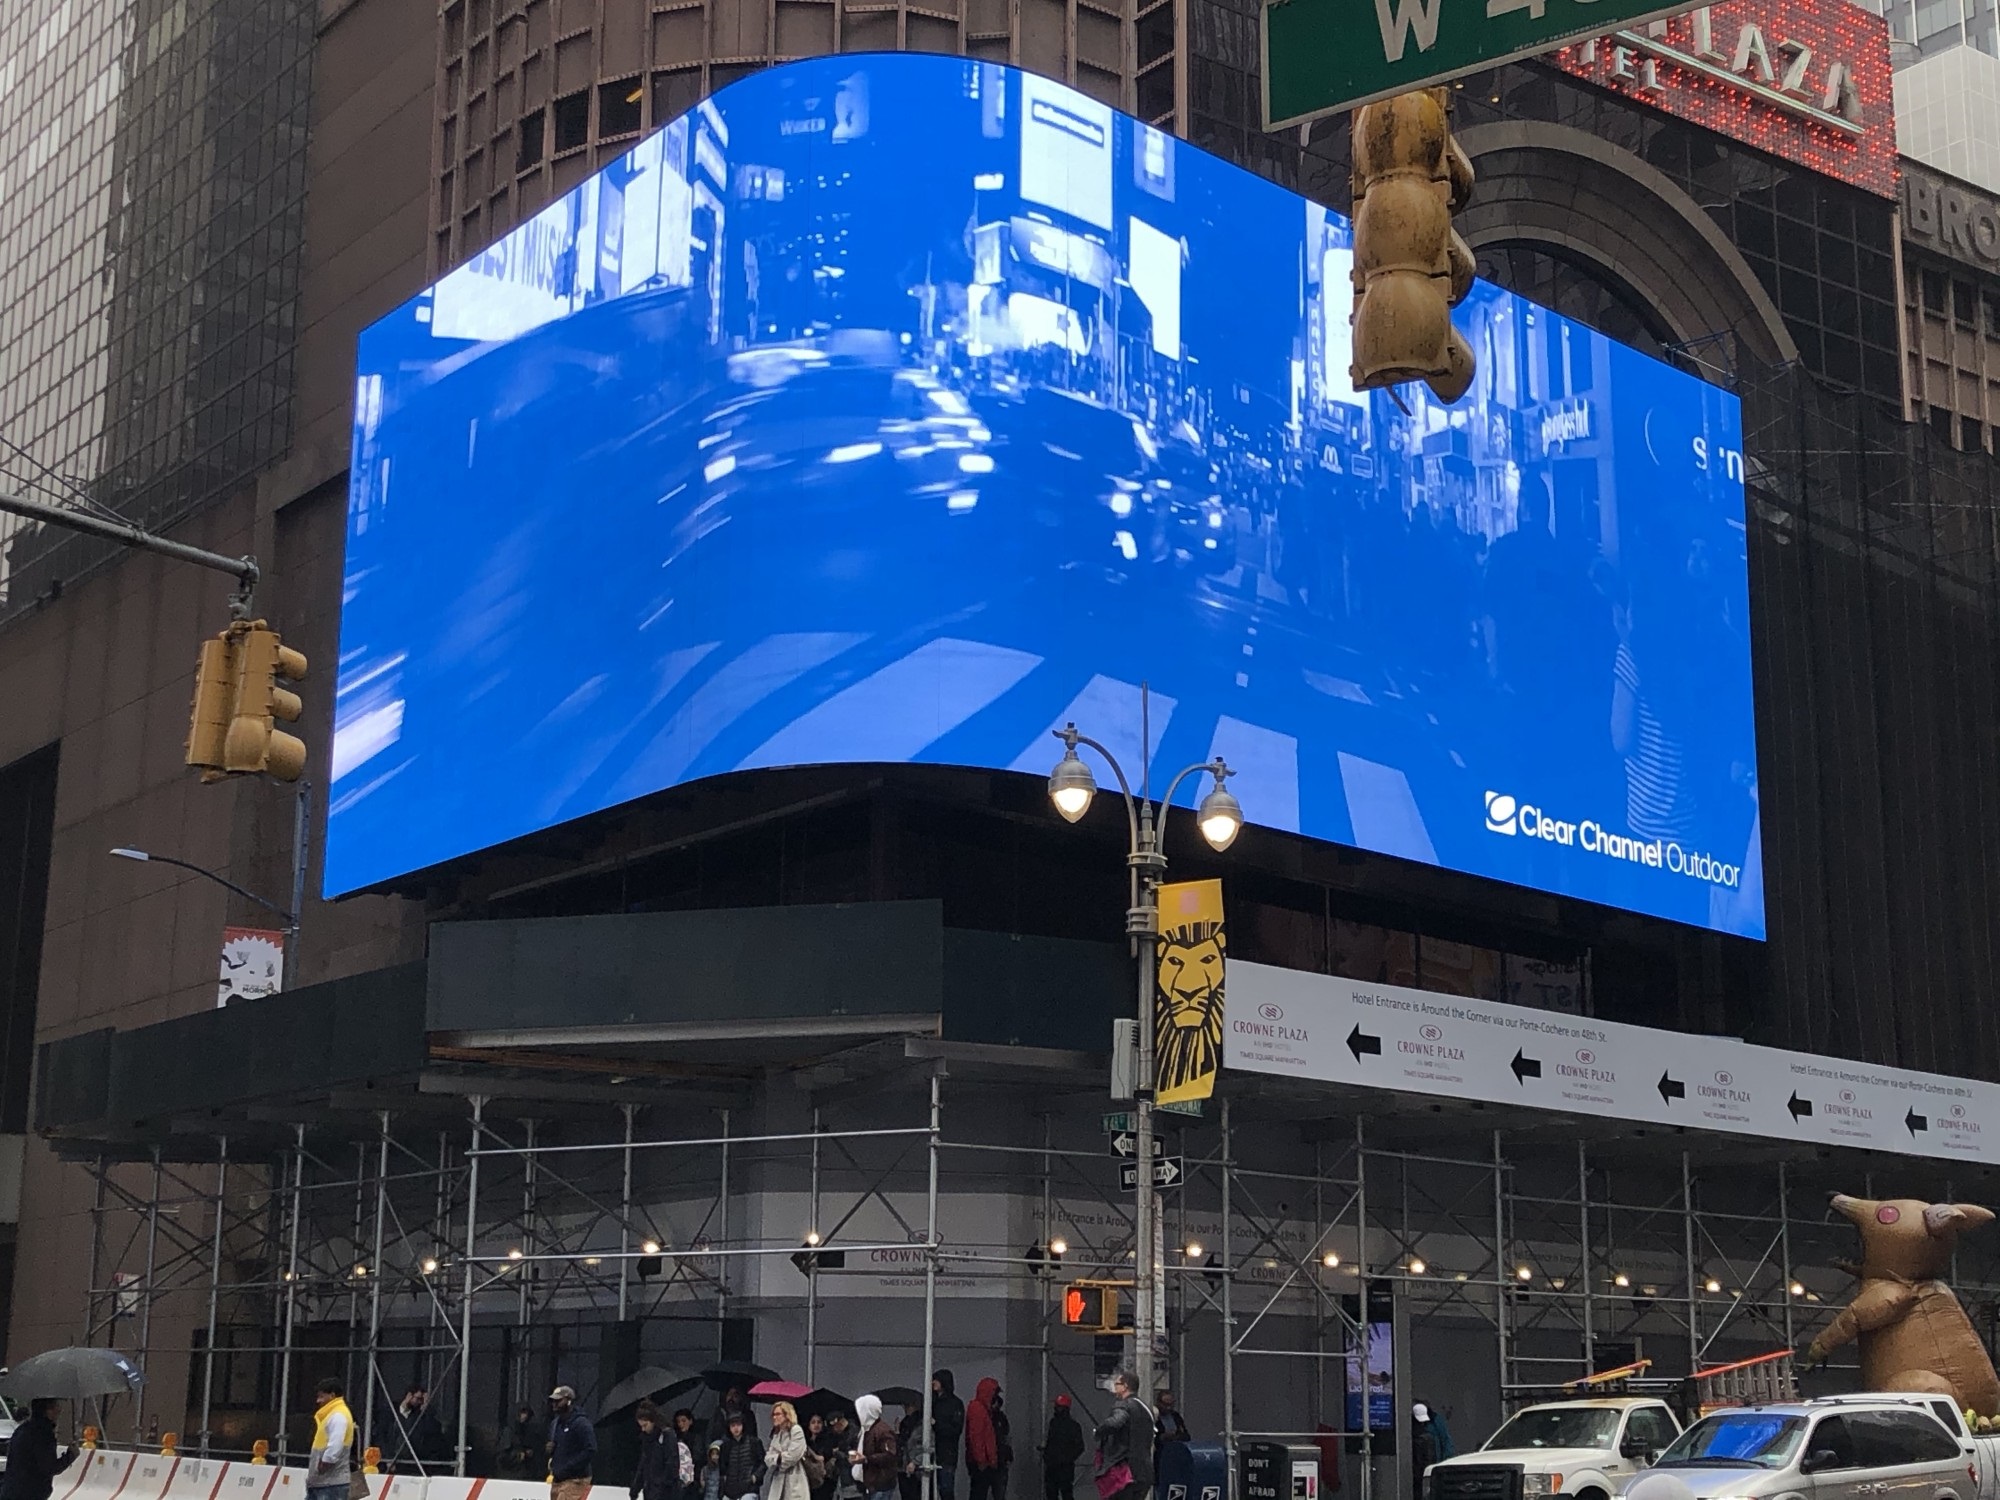 LED displays in Times Square New York